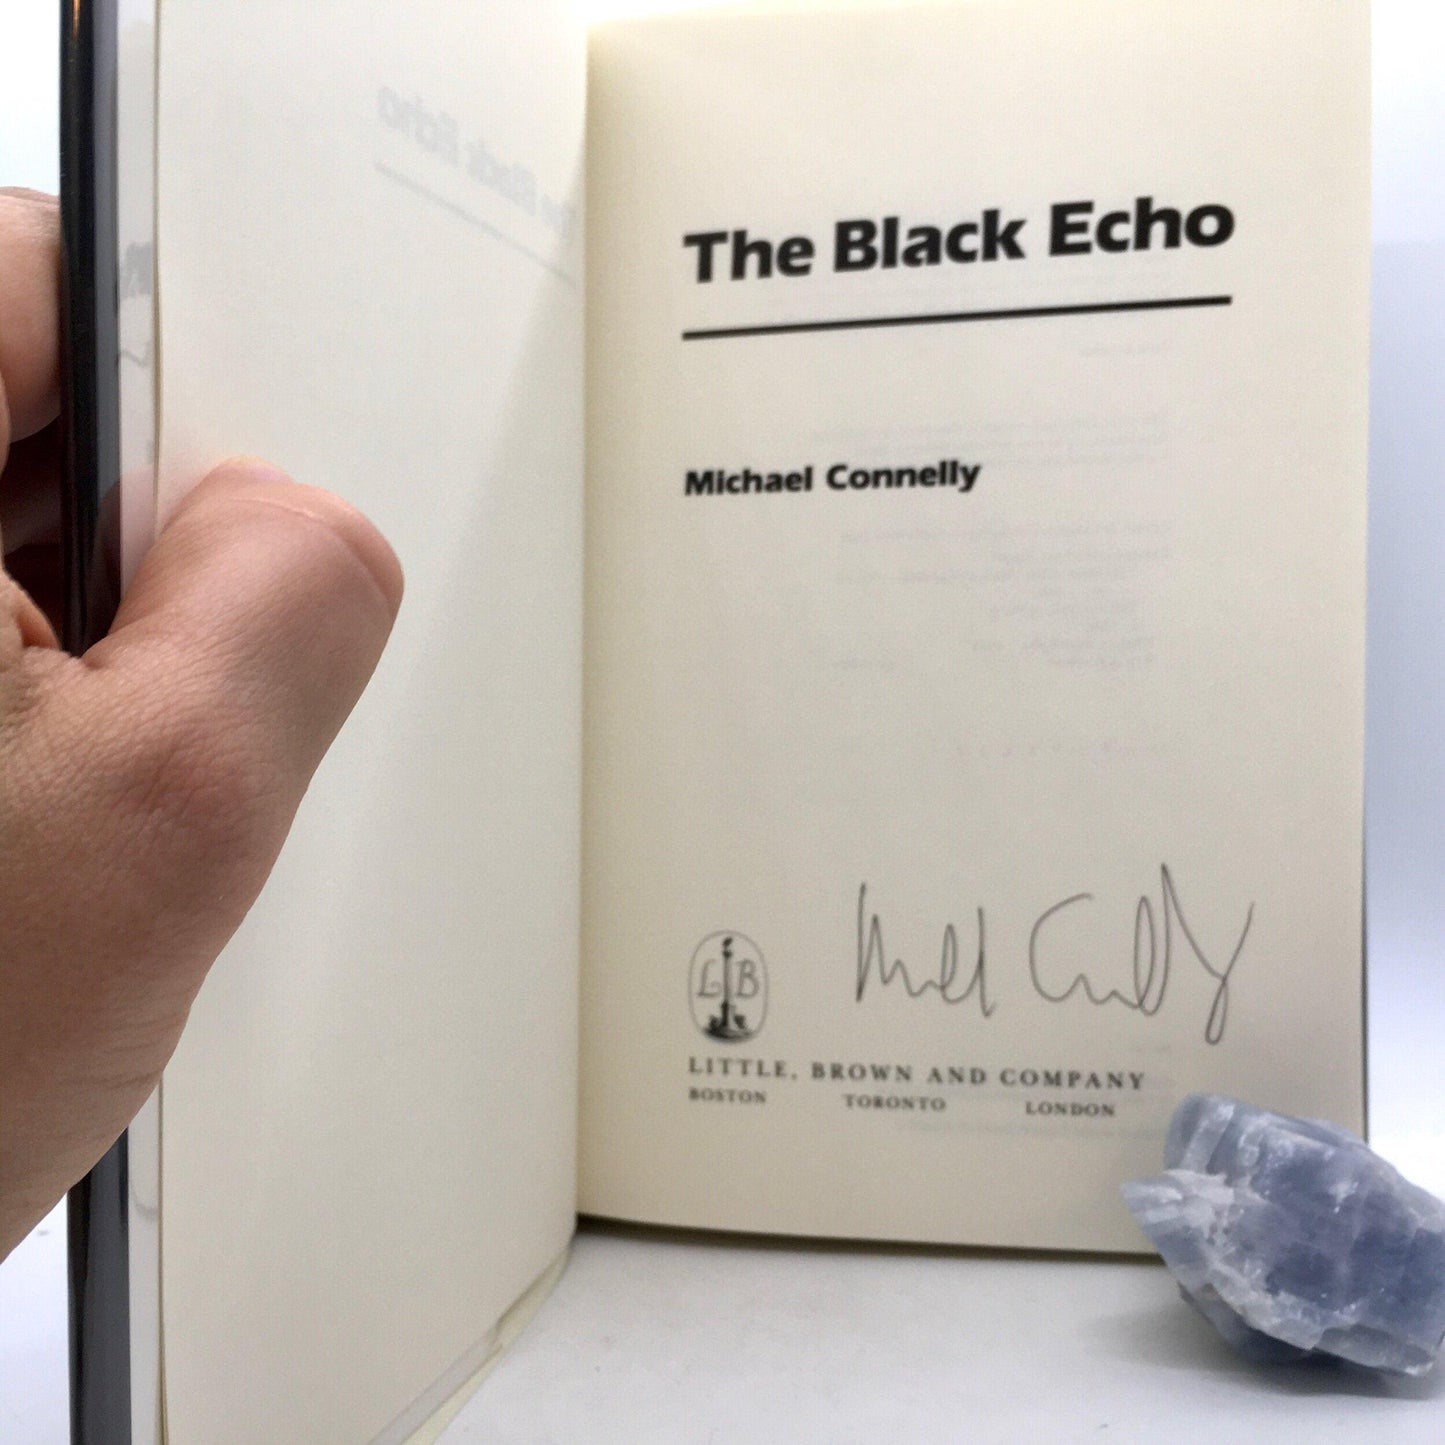 CONNELLY, Michael “Black Echo” [Little, Brown & Co, 1992] 1st Edition (Signed) - Buzz Bookstore